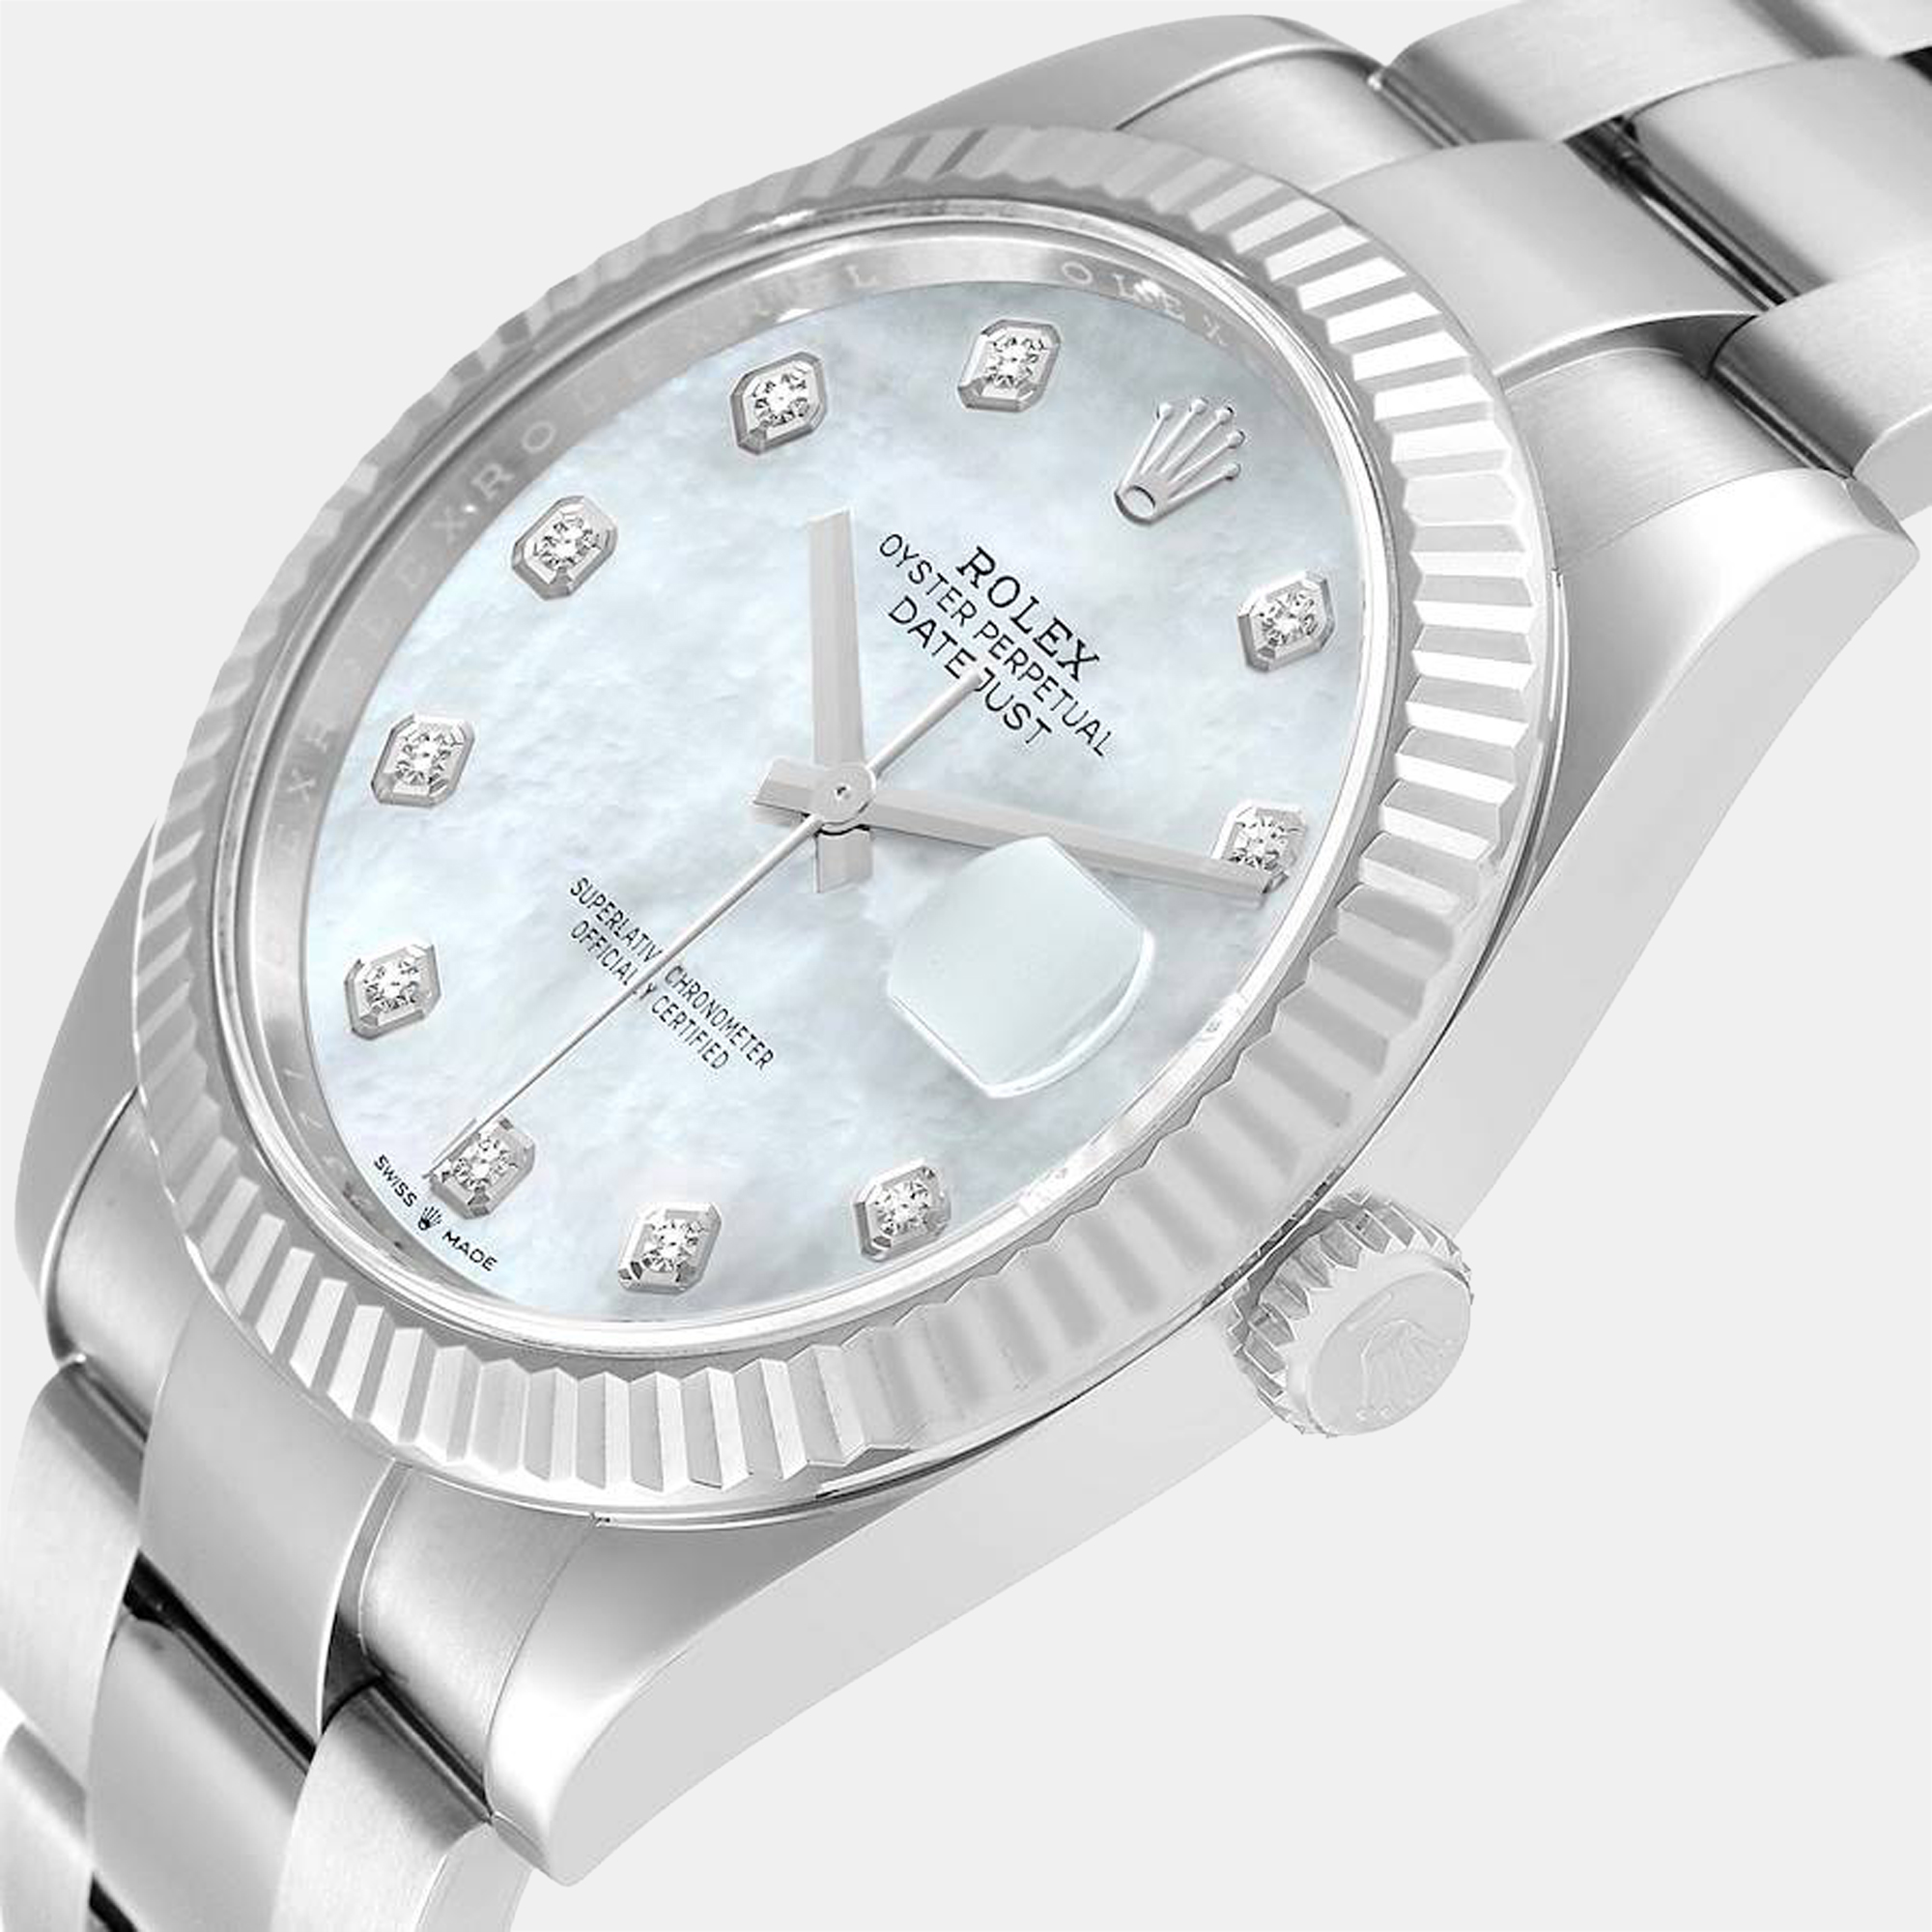 

Rolex MOP Diamonds 18k White Gold And Stainless Steel Datejust 126334 Men's Wristwatch 41 mm